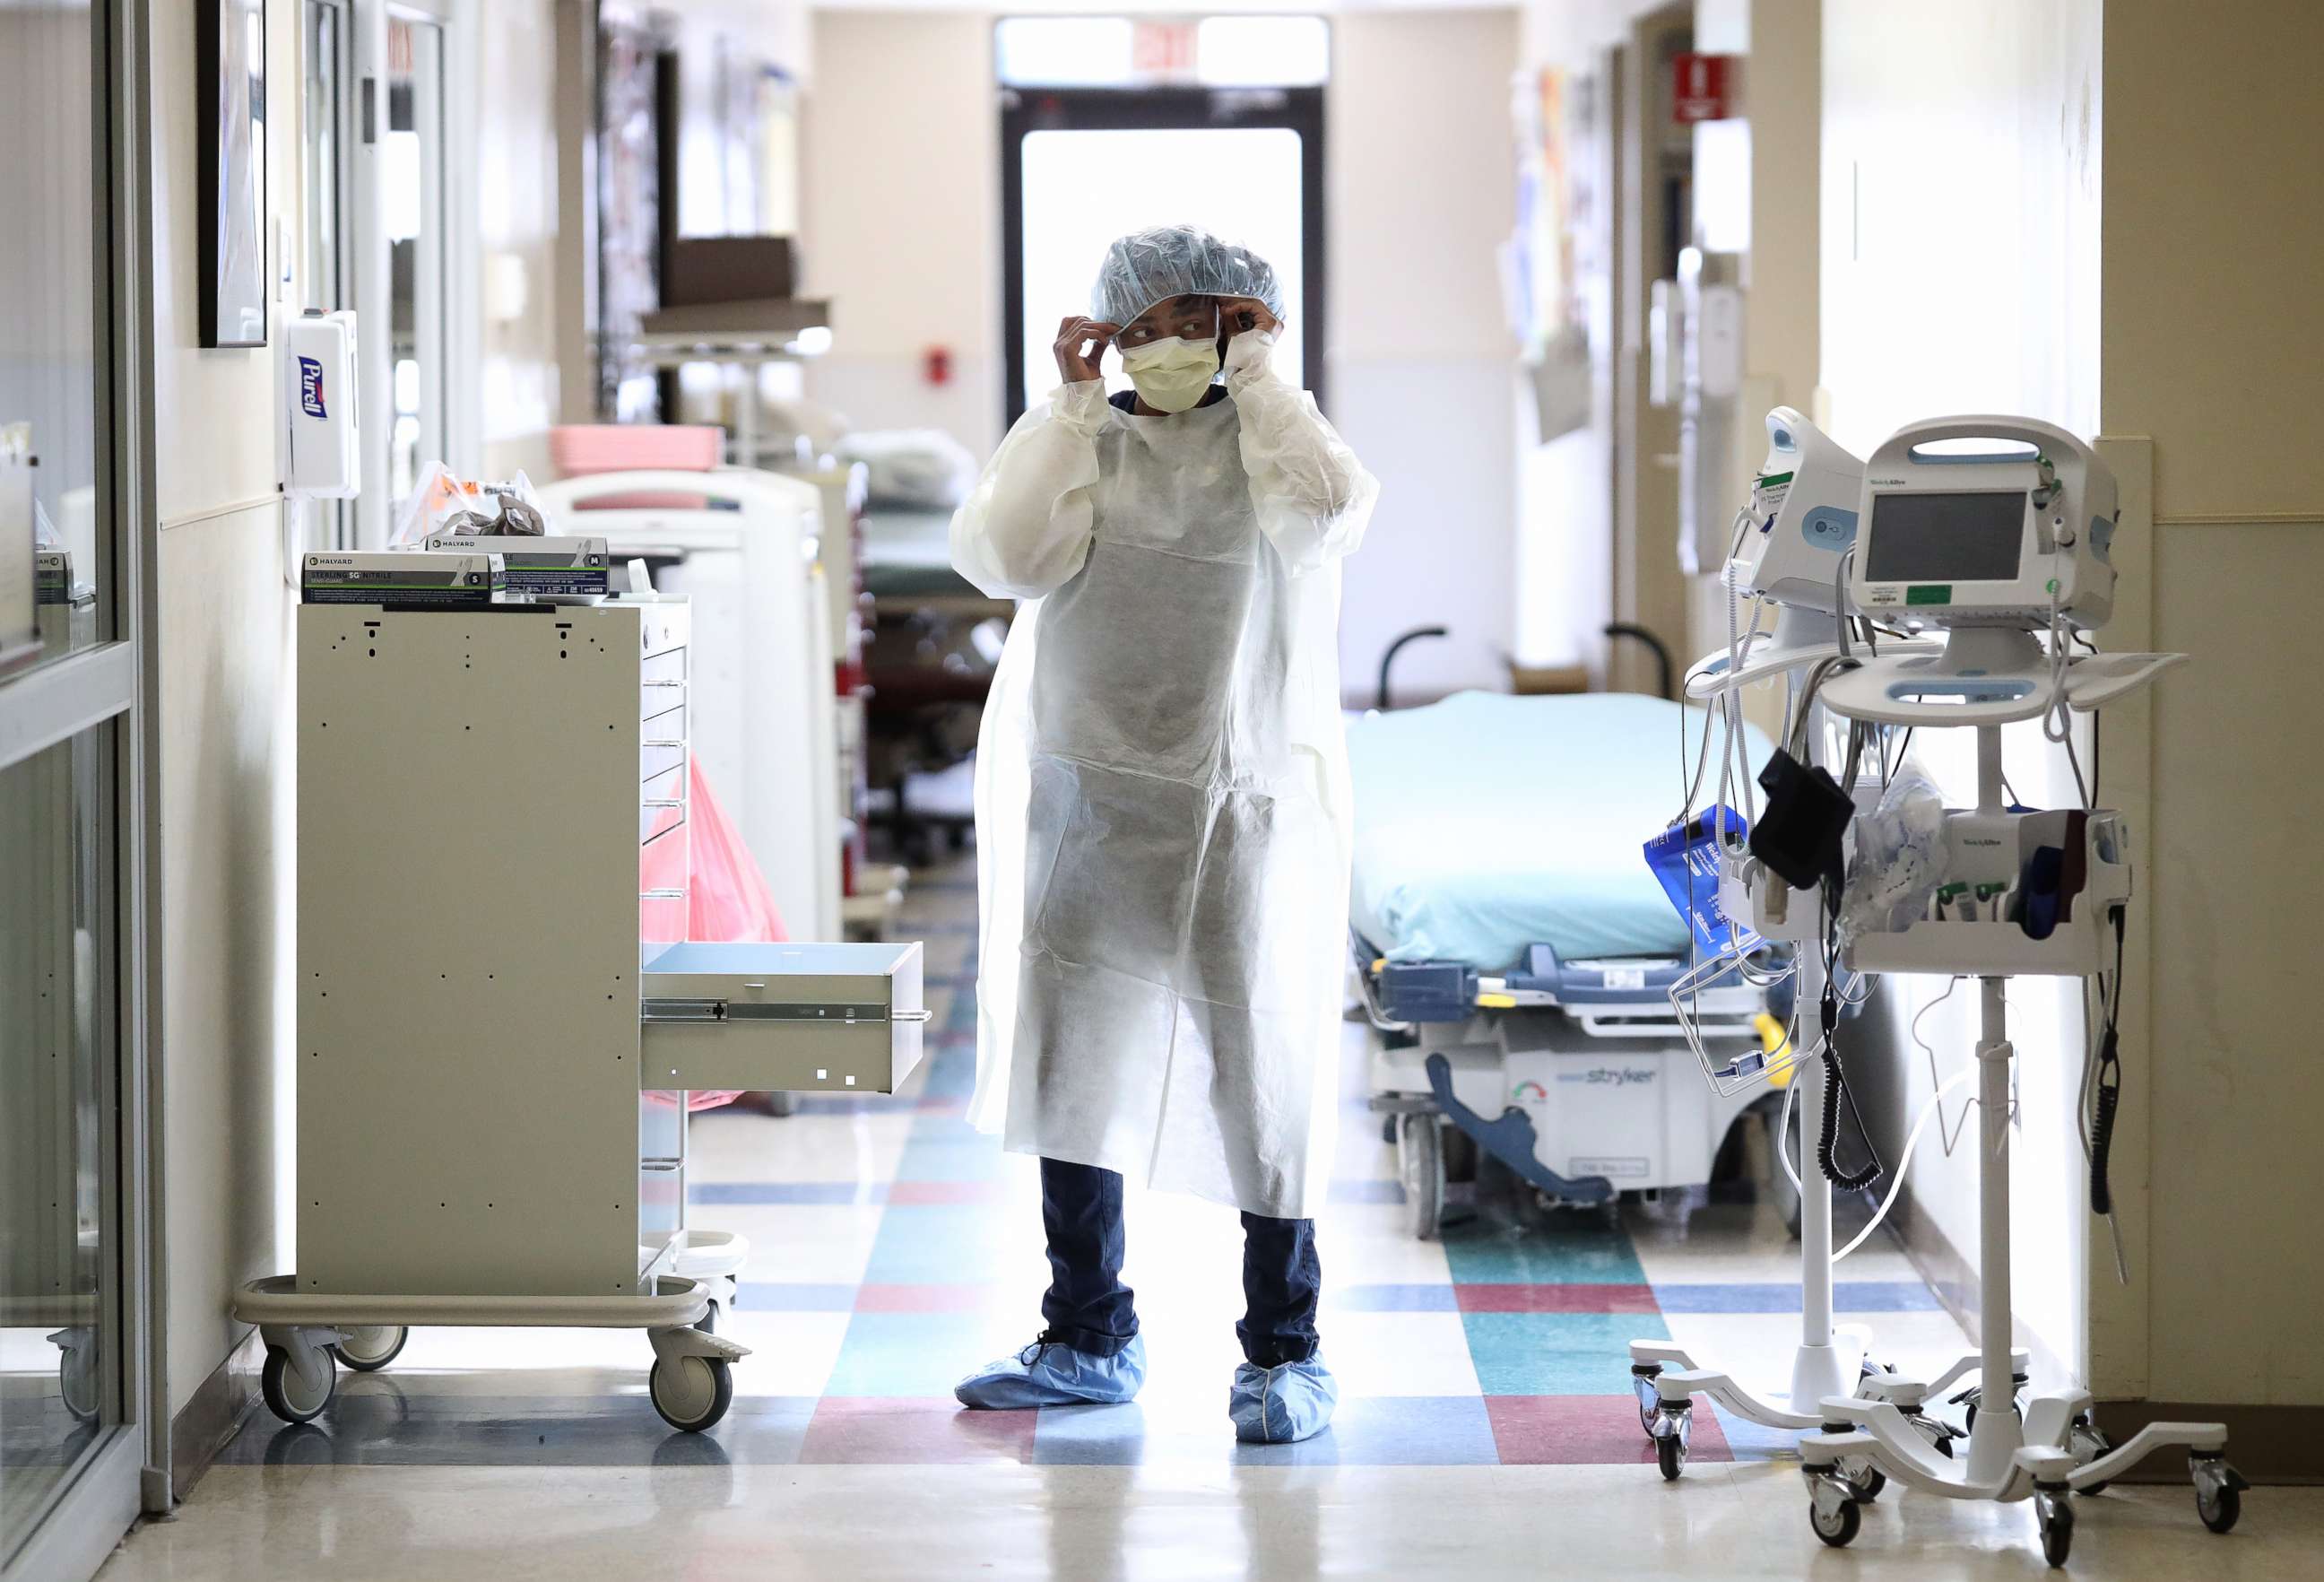 PHOTO: Nurses in the emergency department of MedStar St. Mary's Hospital don personal protective equipment before entering the room of a patient suspected of having coronavirus April 8, 2020, in Leonardtown, Md.